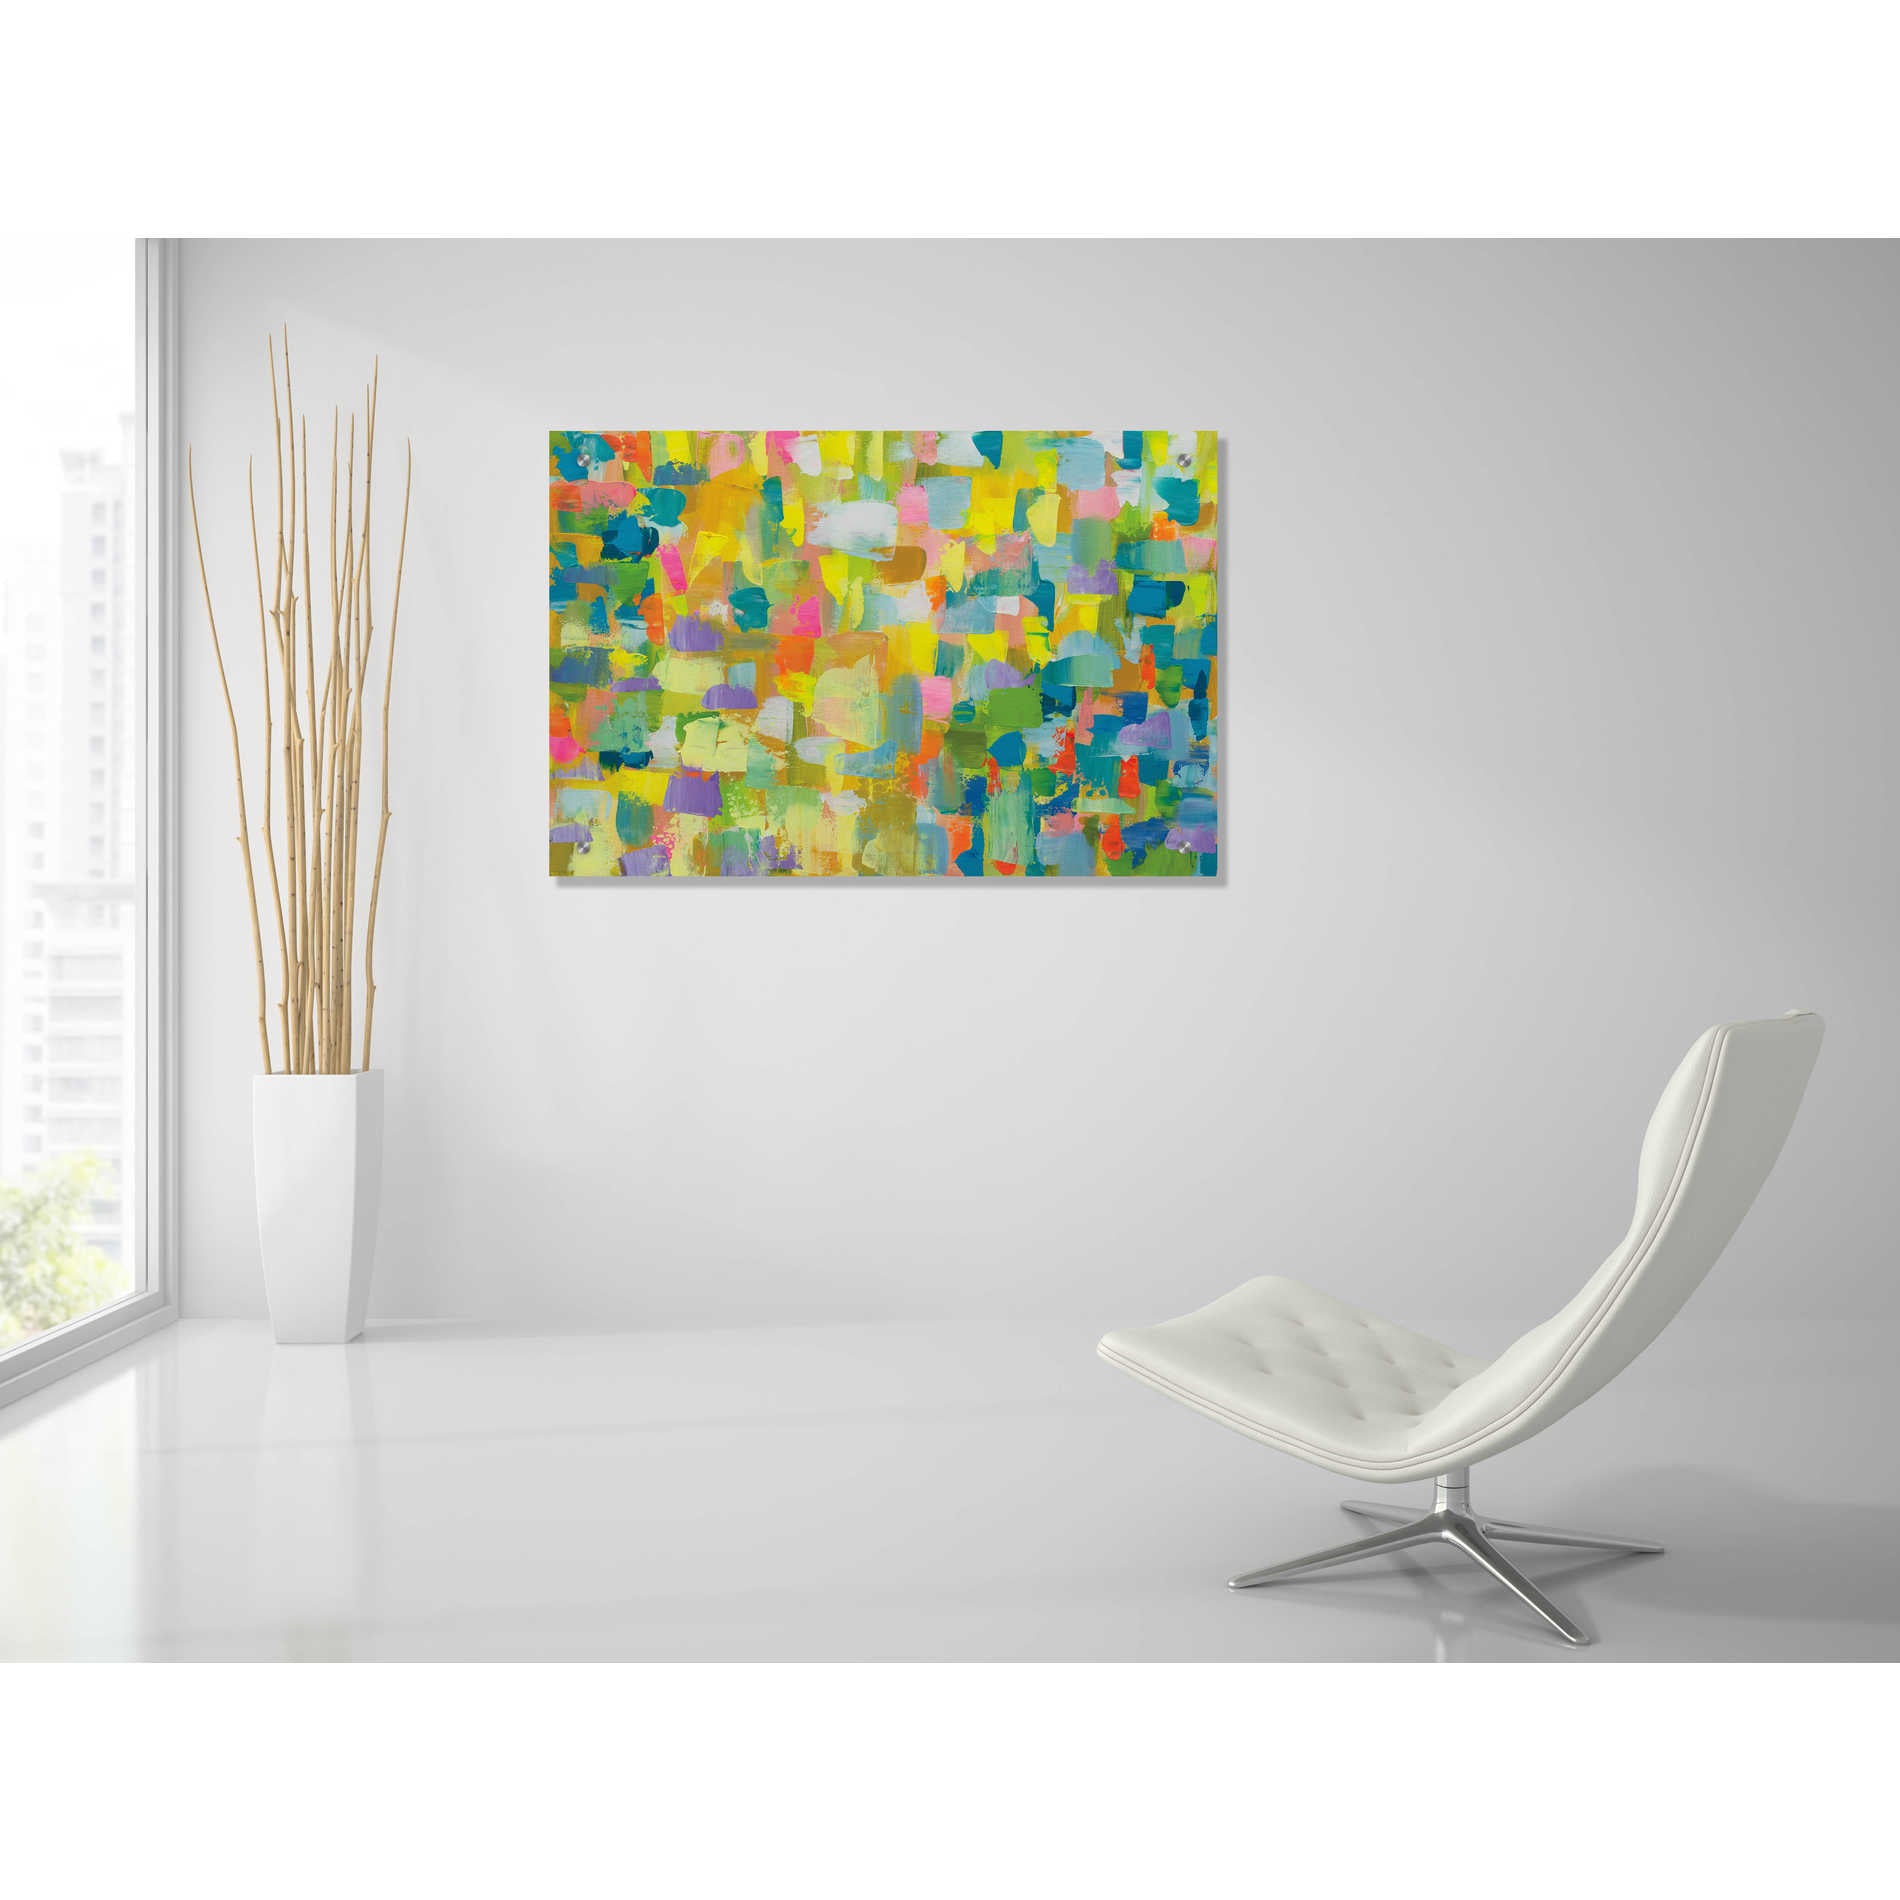 Epic Art 'Merrymaking' by Jeanette Vertentes, Acrylic Glass Wall Art,36x24